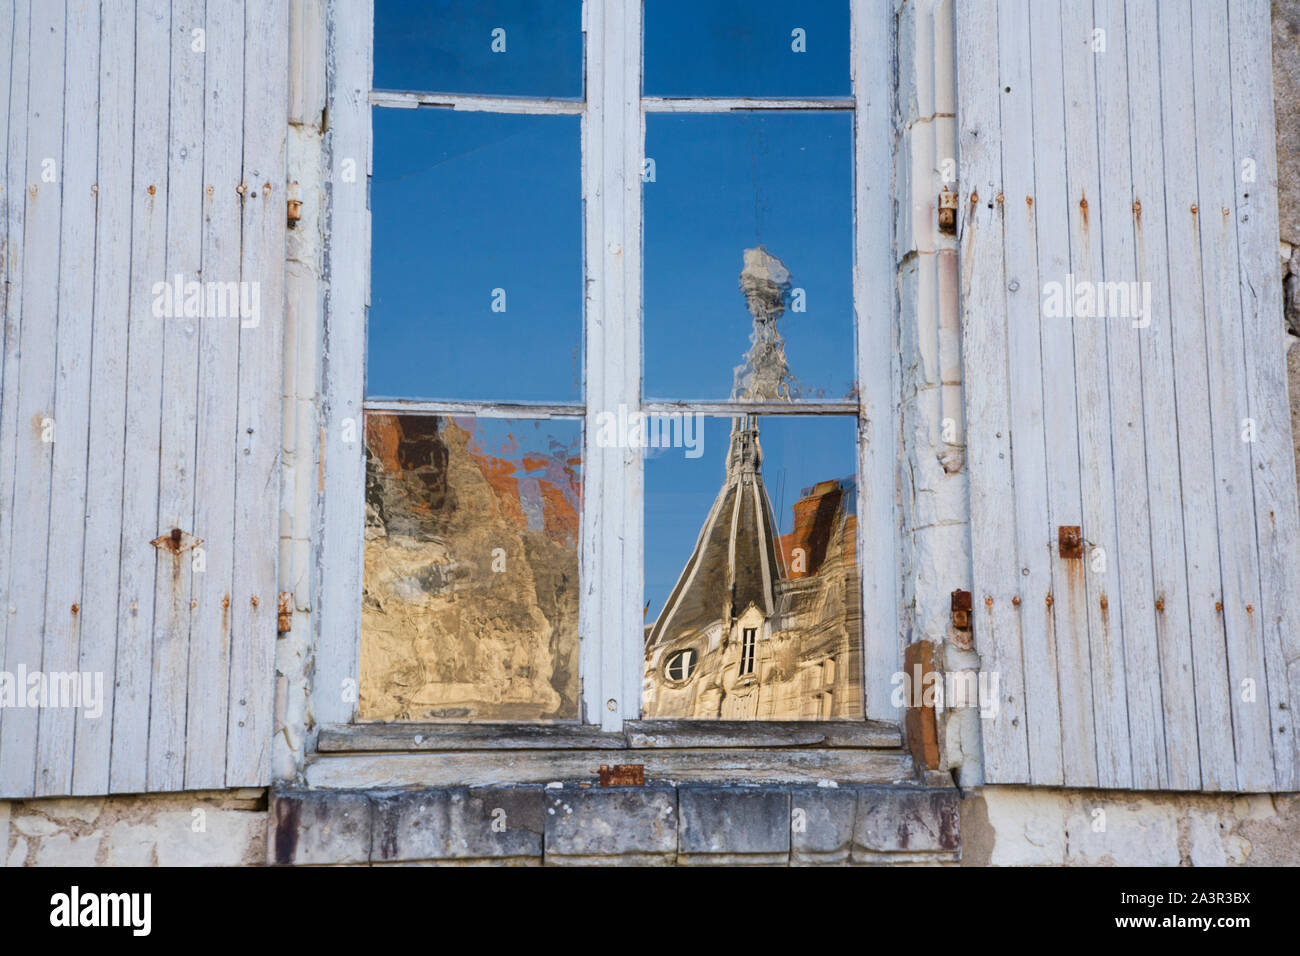 Chateau reflected in window Stock Photo